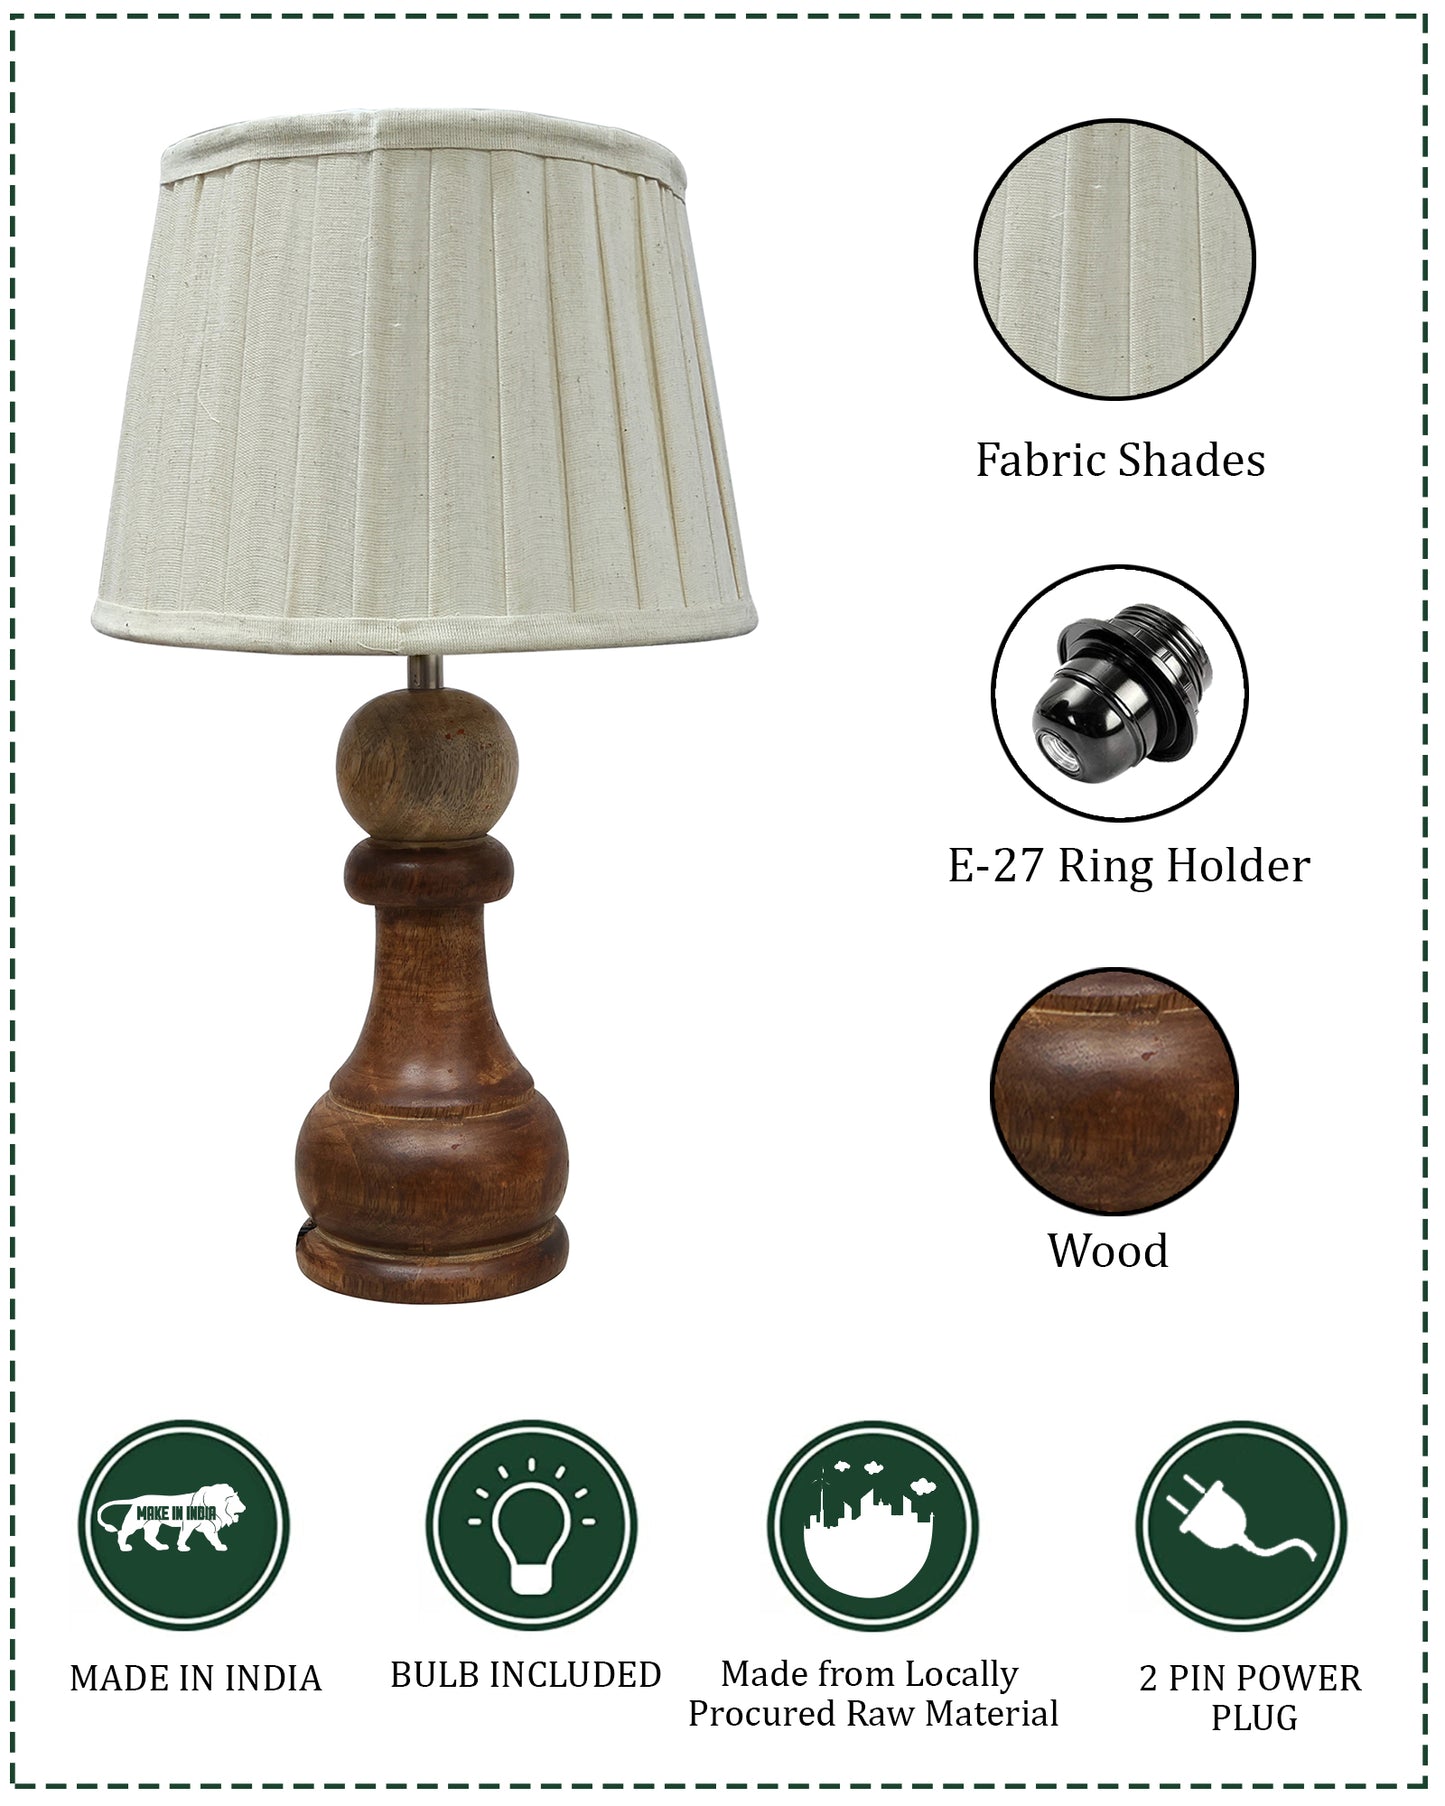 Chess Bedside Table Desk Lamp Rustic Wood Base Fabric Shade for Décor, Accent Light, Gameroom, Kids', Living Room, Bedroom, Office